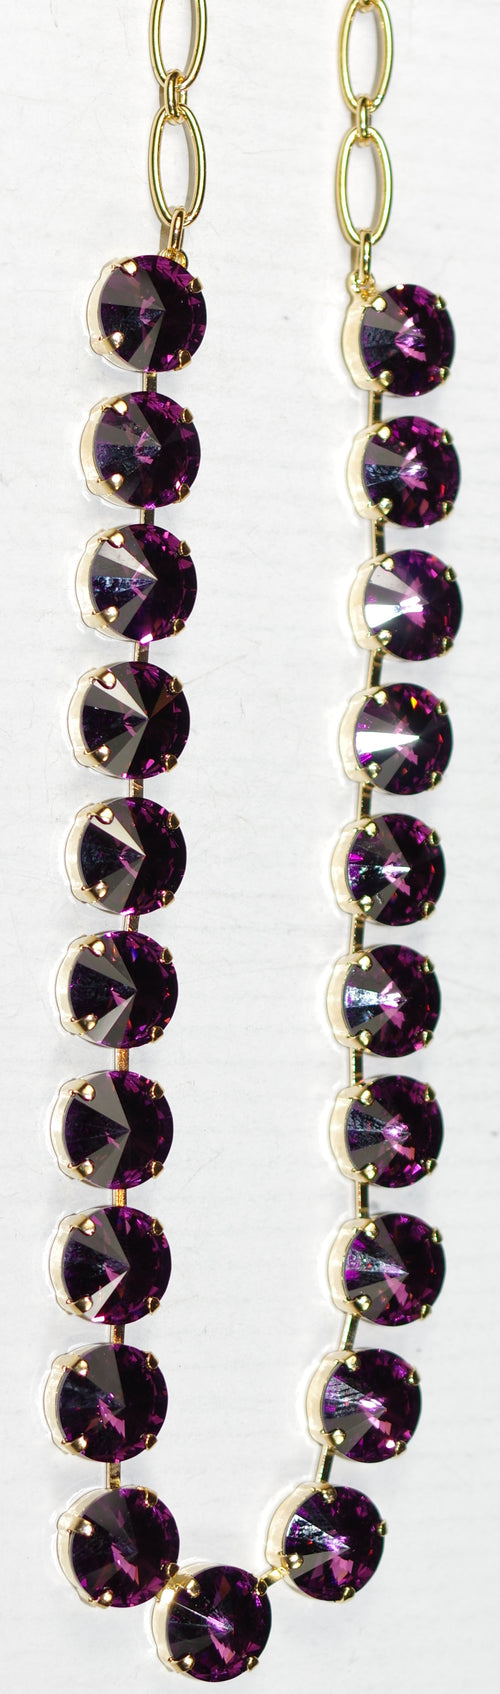 MARIANA NECKLACE: purple 1/2" stones in yellow gold setting, 18" adjustable chain